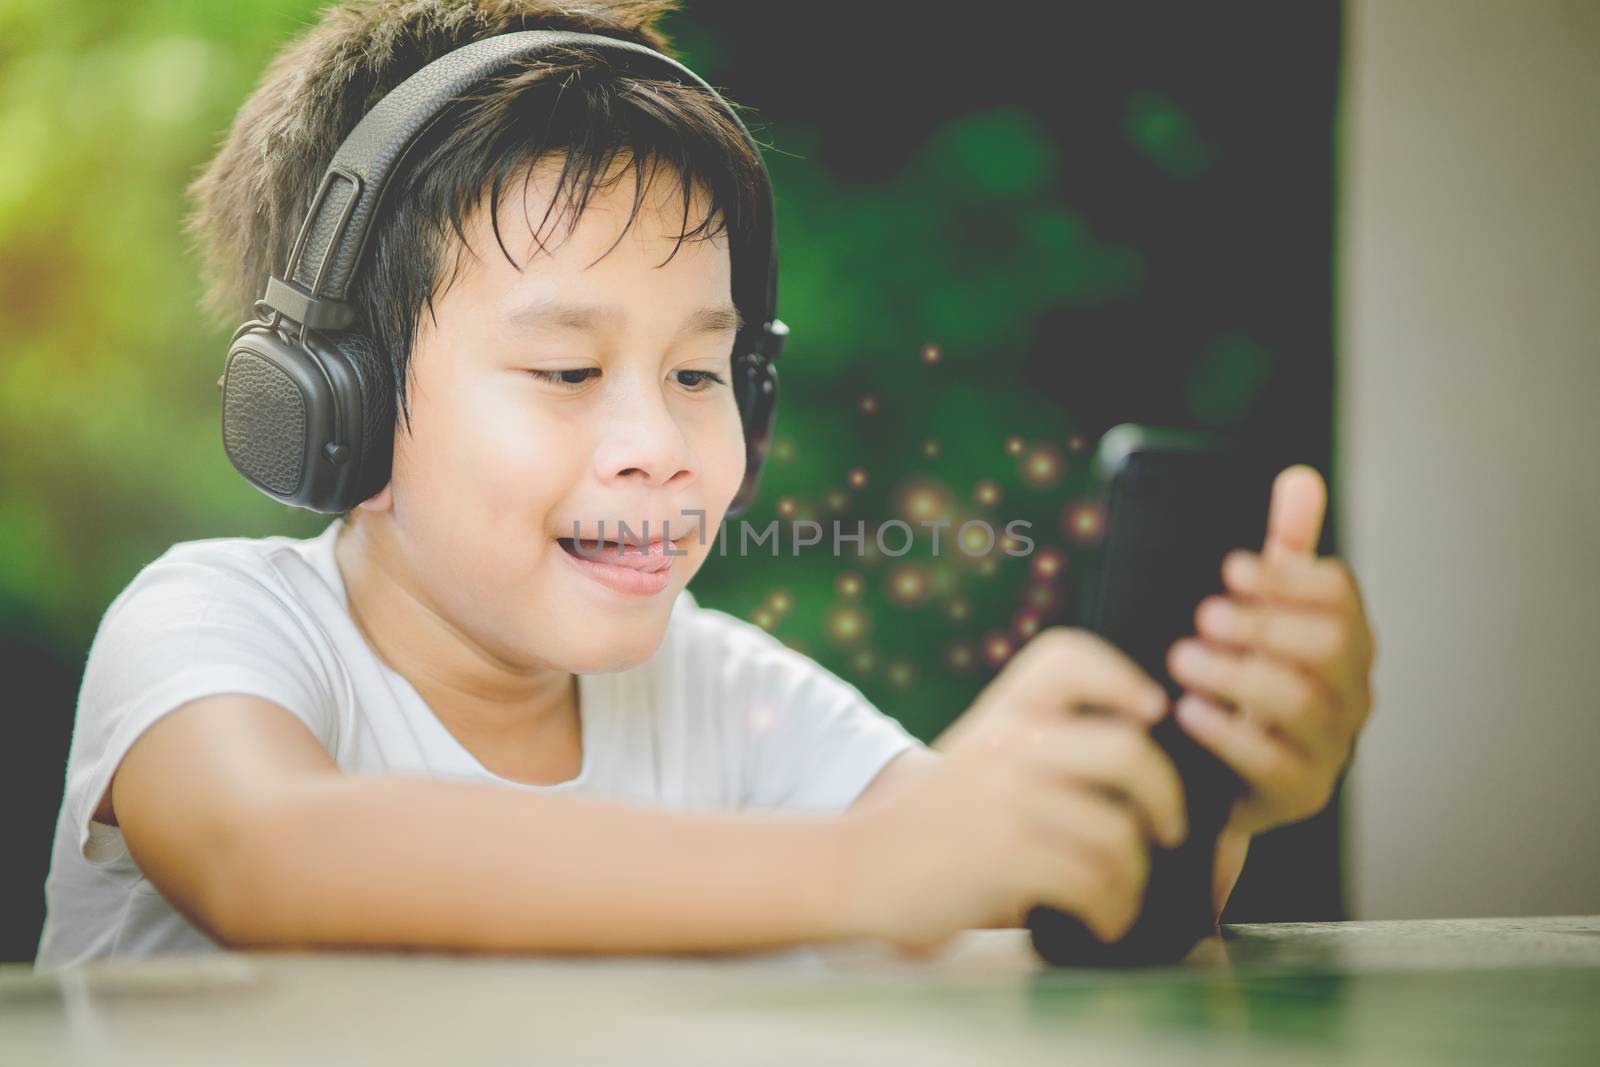 The boy listening to music from smartphone by rainyrf